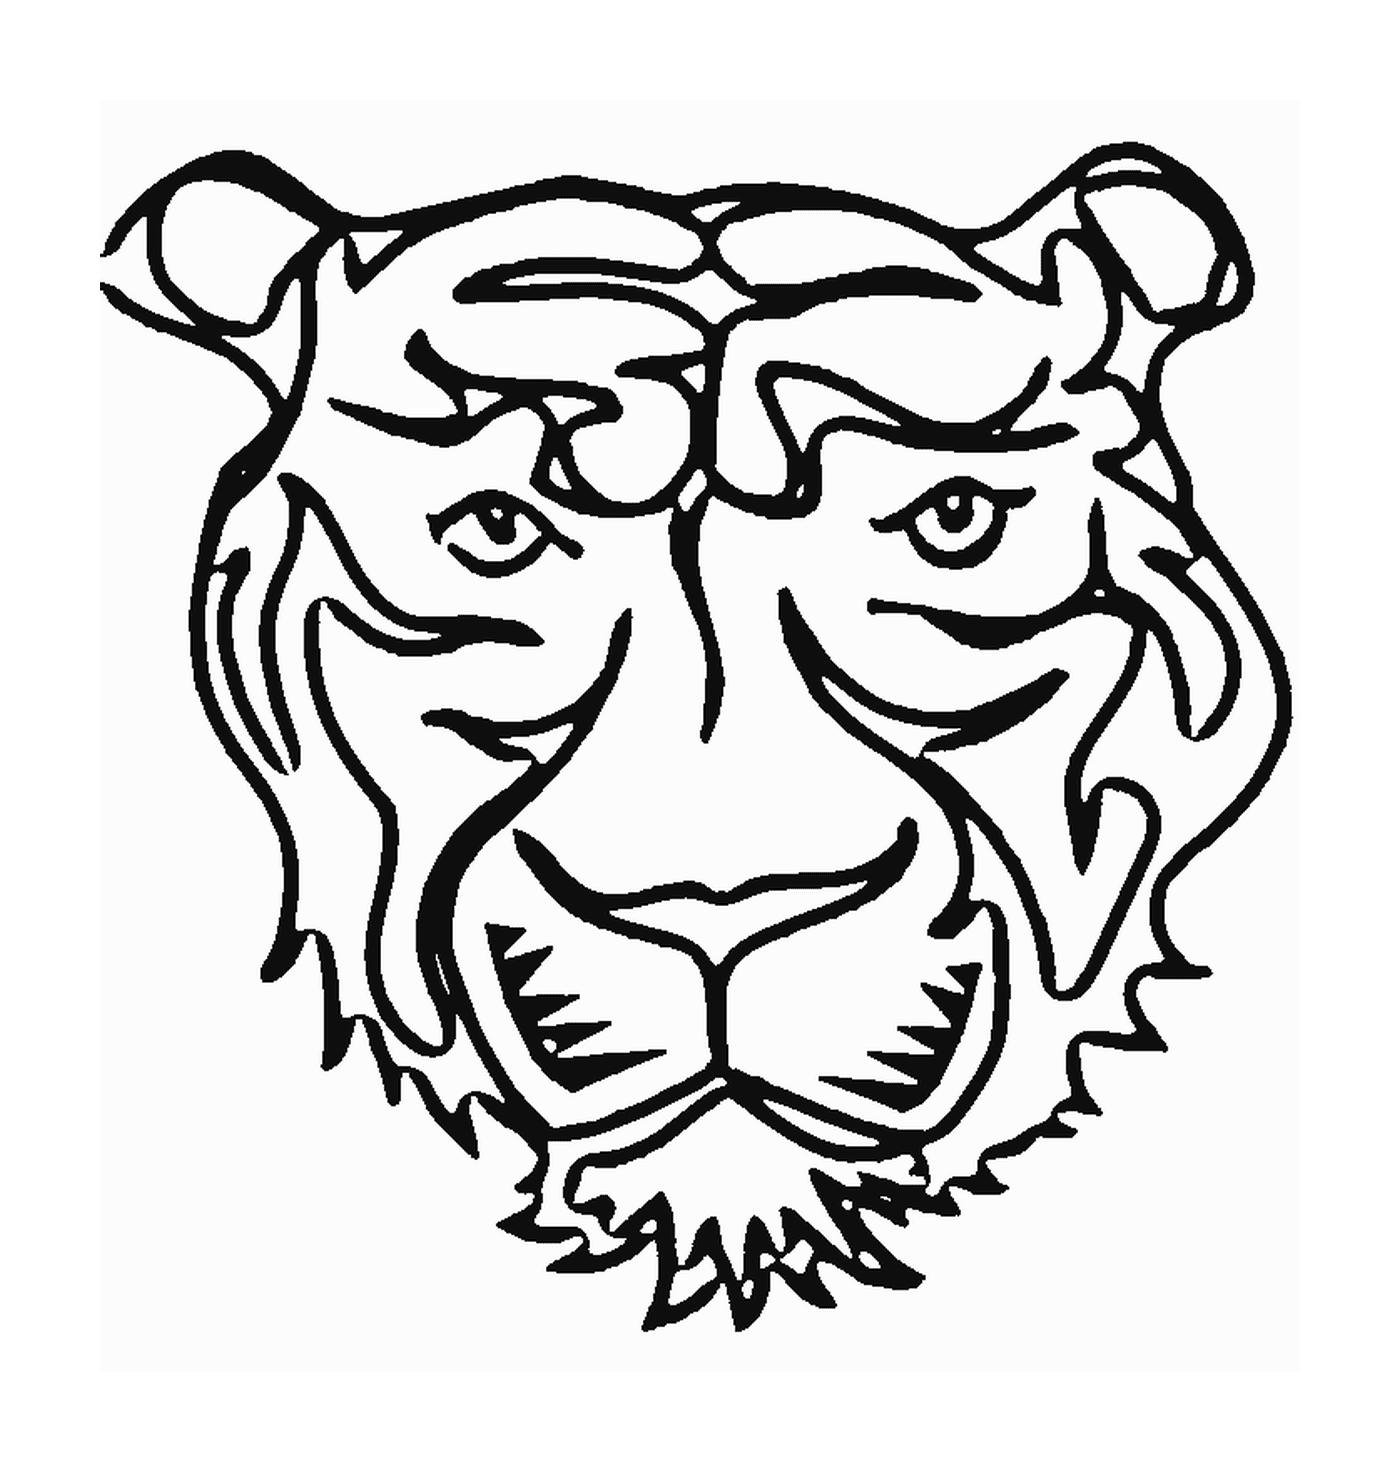  A tiger head from the front 